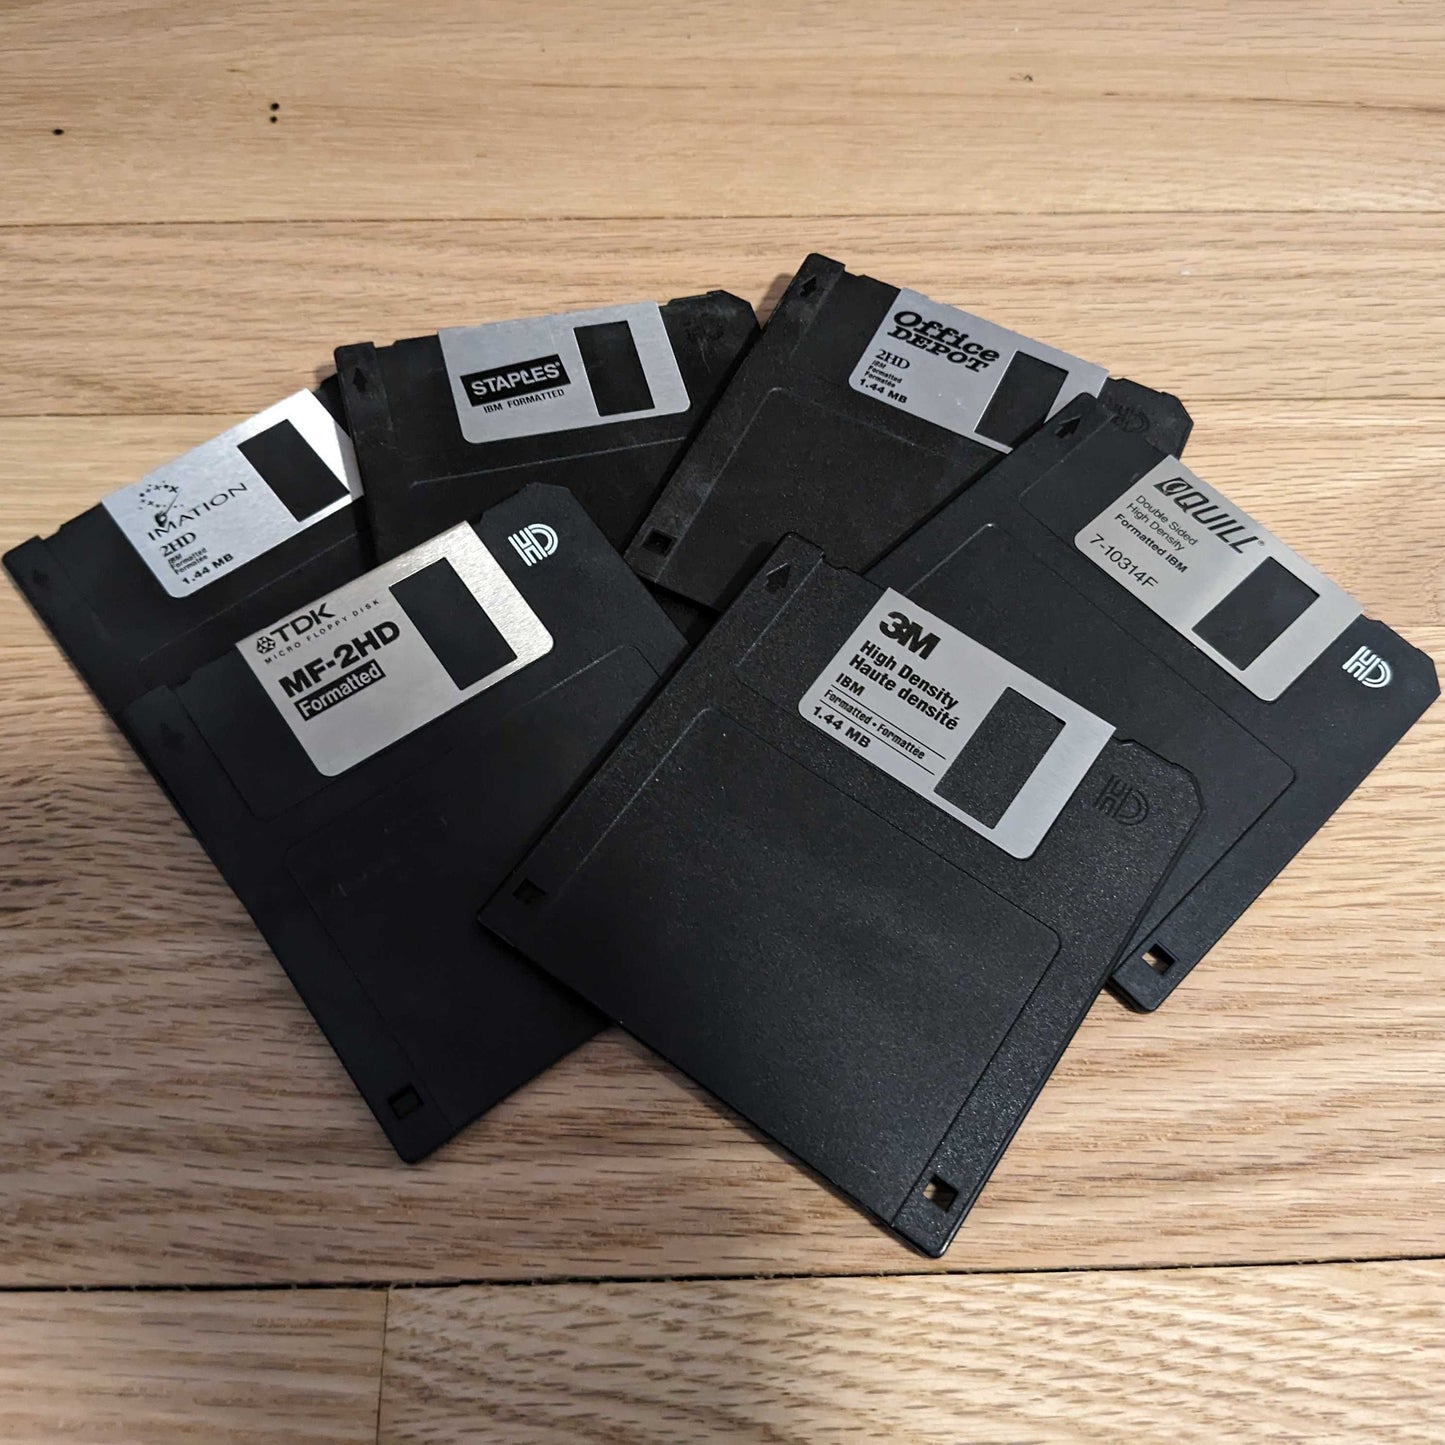 Reformatted 3.5" DS/HD Floppy Disks